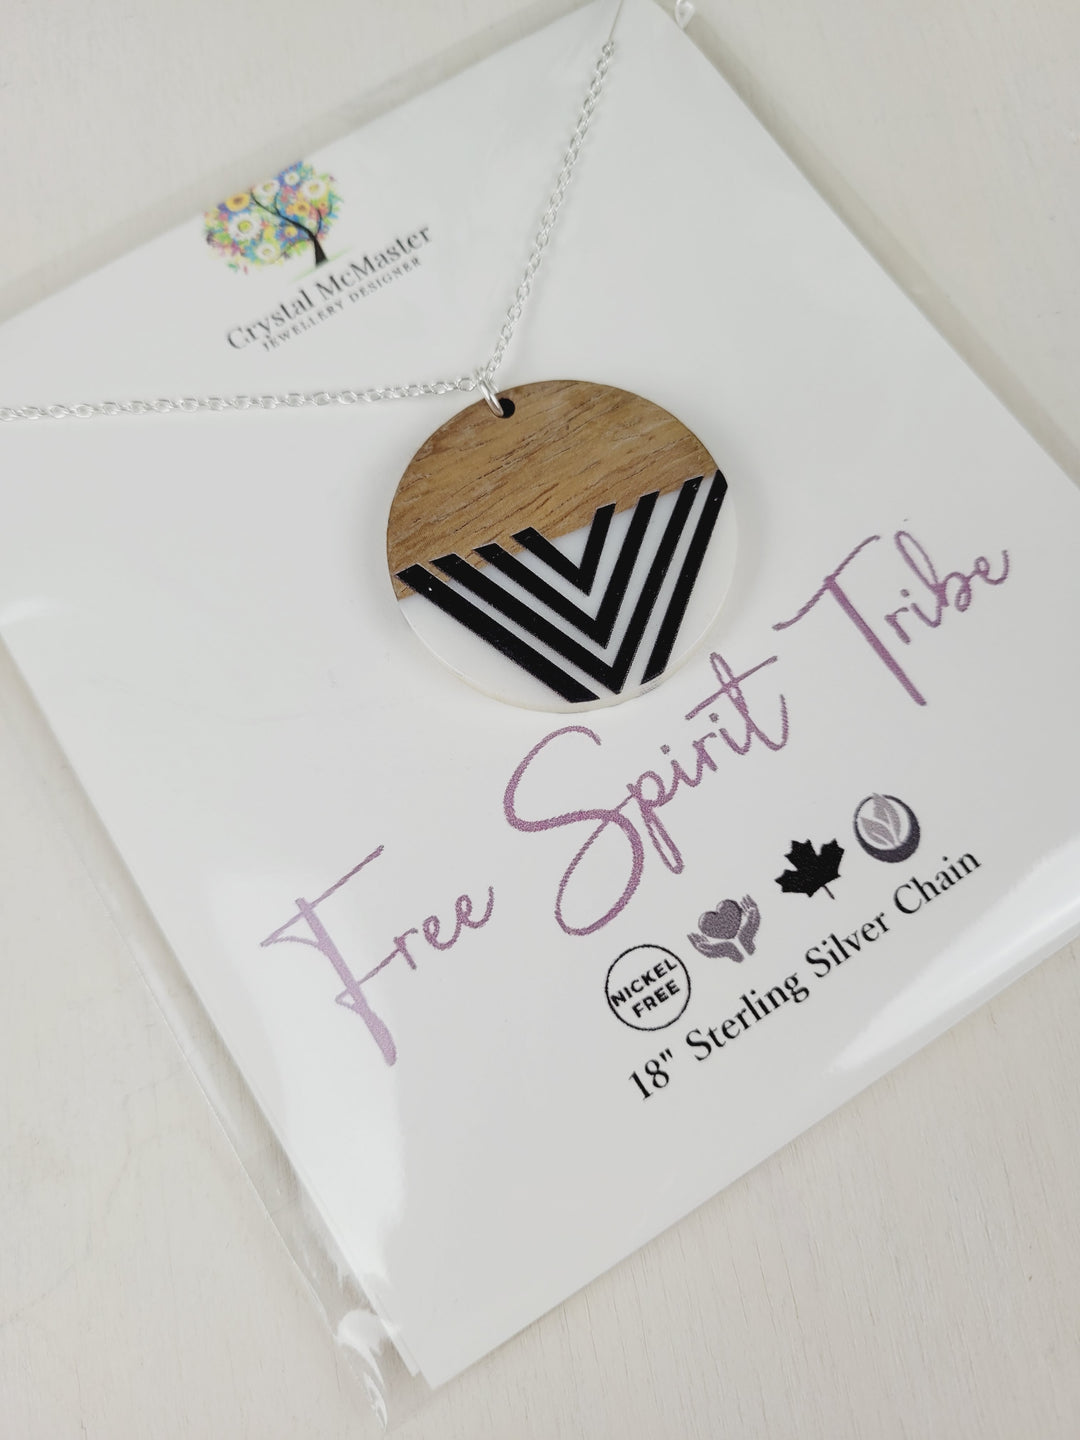 Crystal McMaster Jewellery, Sterling Silver Necklaces- Free Spirit Tribe Collection